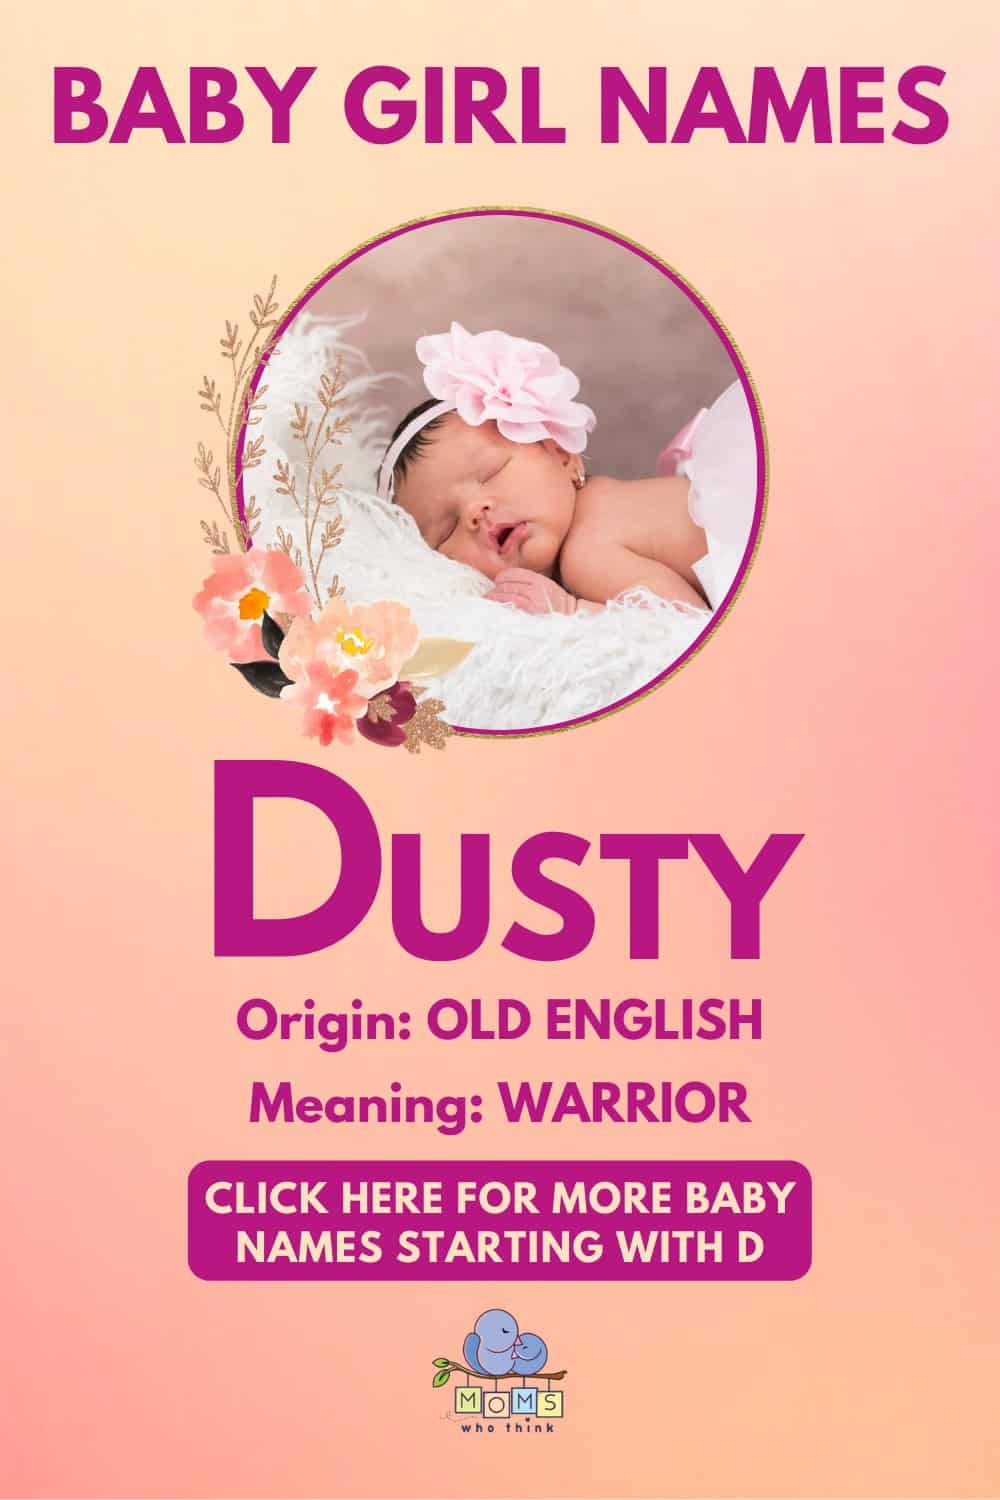 Baby girl name meanings - Dusty